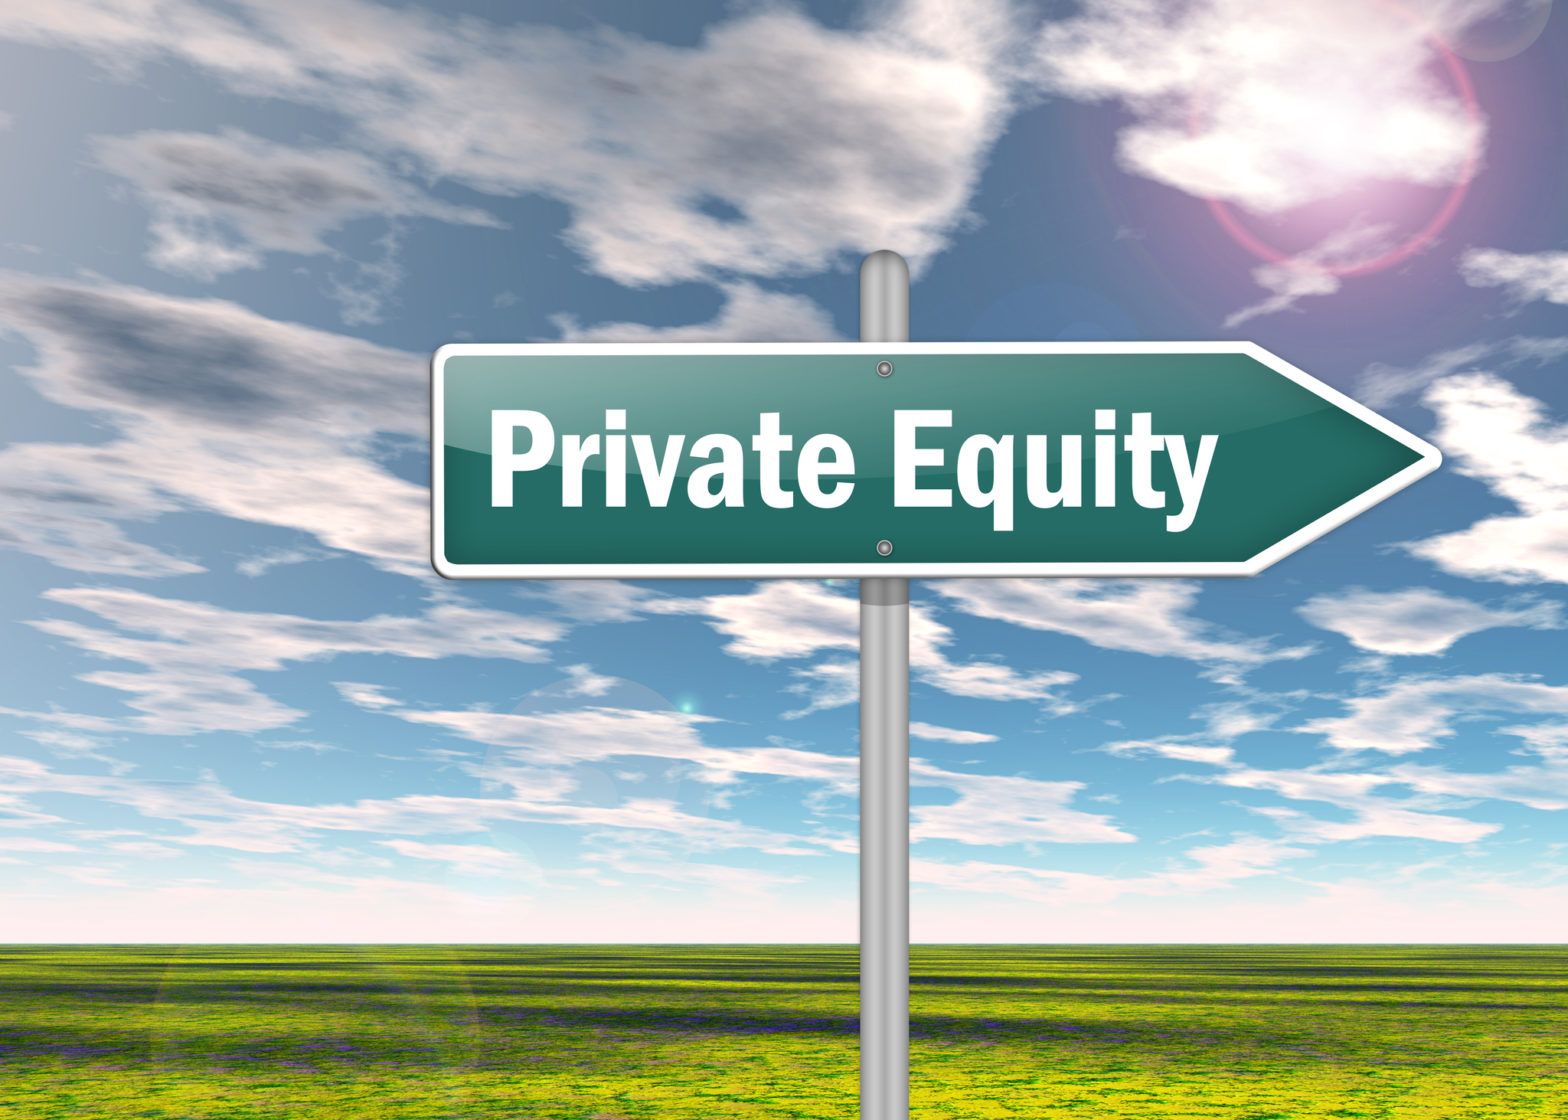 UBP and Rothschild unveil private equity fund